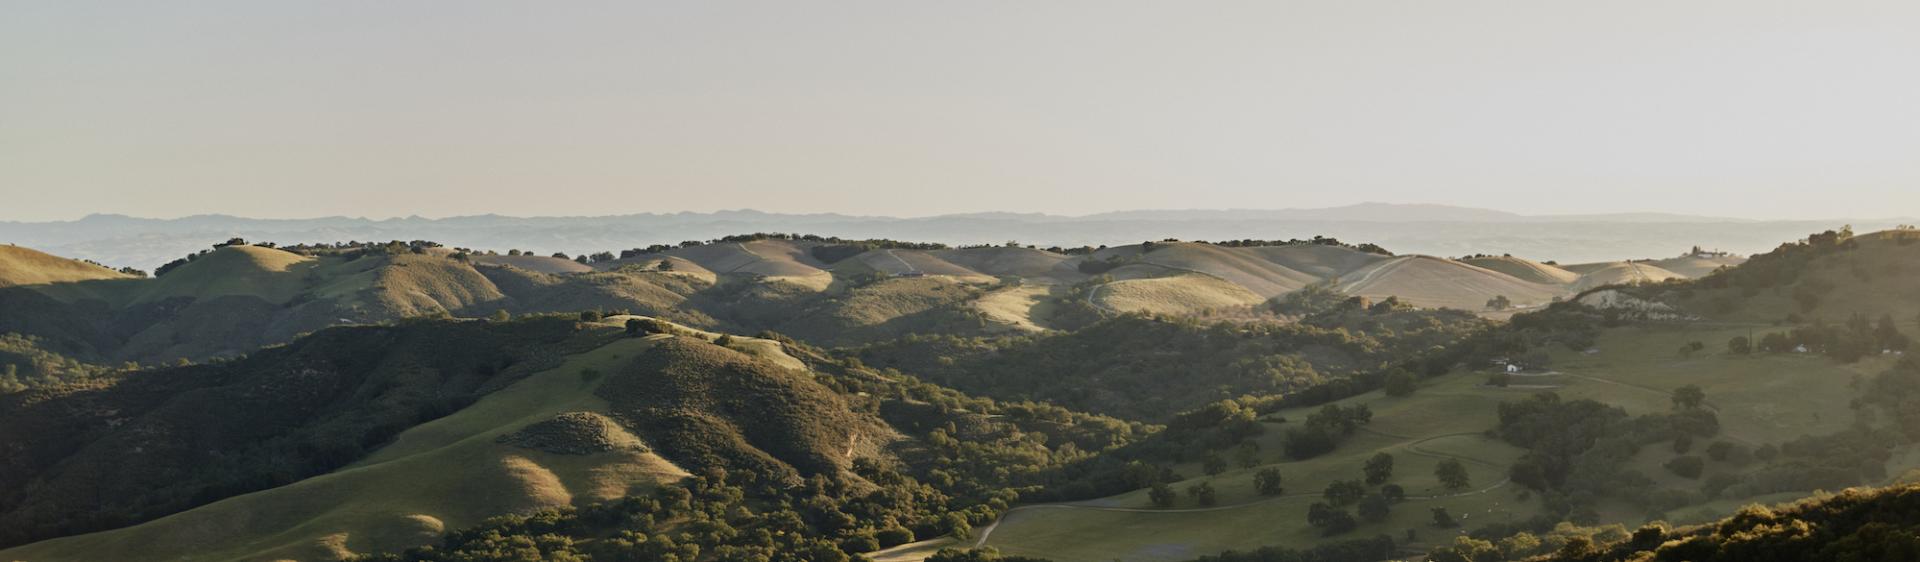 Rolling hills in Paso Robles, California.